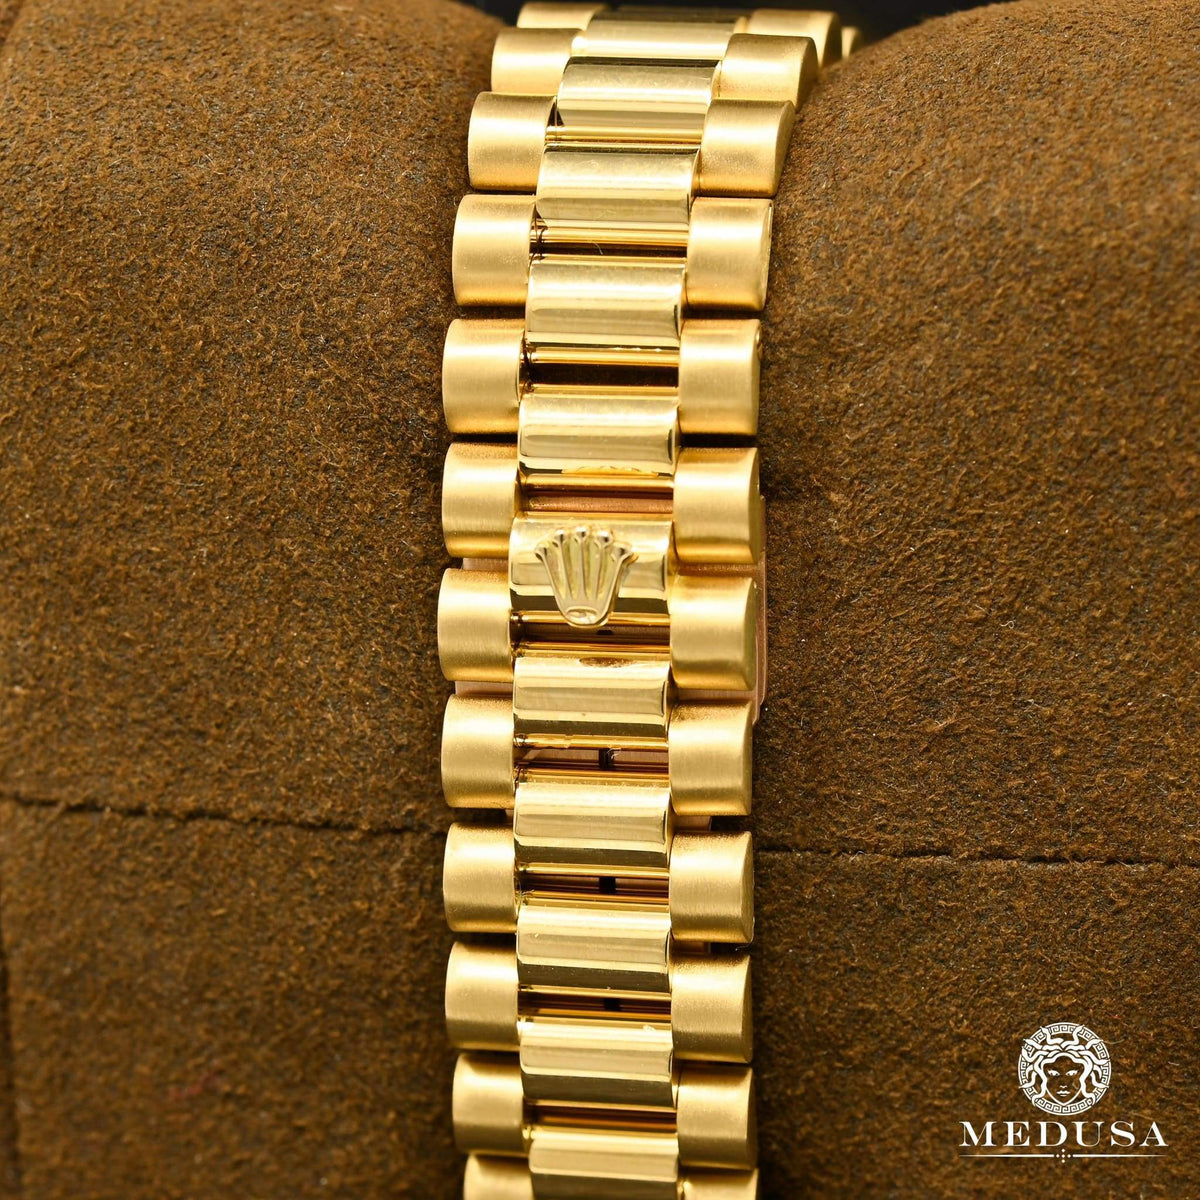 Montre Rolex | Montre Homme Rolex President Day-Date 36mm - Iced Champagne Or Jaune